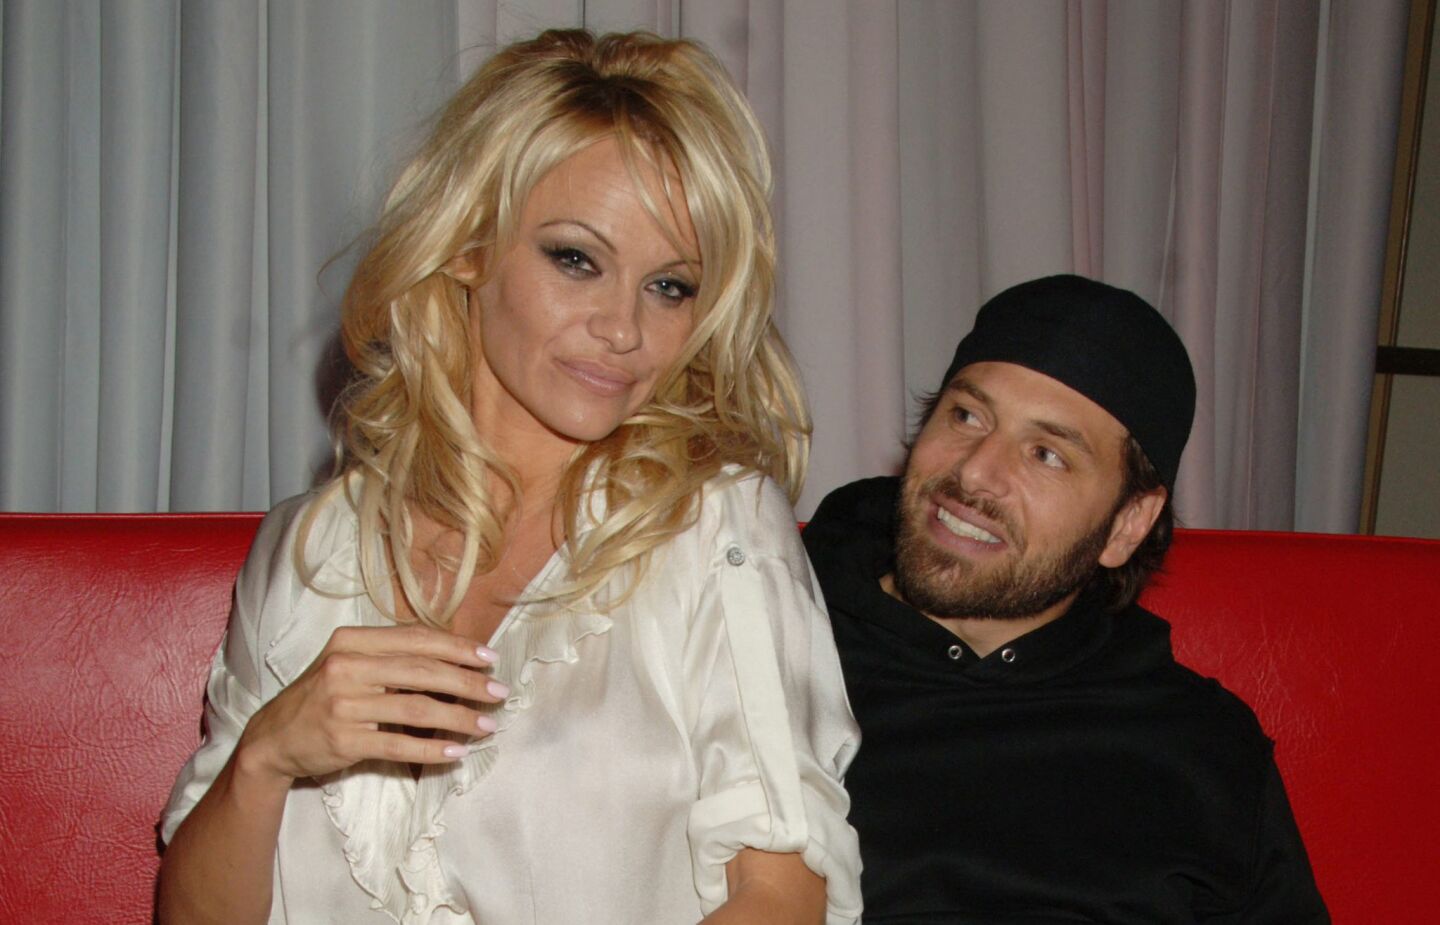 Pamela Anderson and her ex-husband Rick Salomon have given wedded bliss a second chance. The news emerged in January on the red carpet for Sean Penn's Help Haiti Gala in L.A., where Anderson was flashing a big ol' sparkler on her left hand. When asked by E! News if that meant the two had wed, the "Baywatch" alum answered, "Yes." "Our families are very happy, and that's all that matters," Anderson told E!, noting that she and film producer Salomon were pleased as well. The actress did not reveal their wedding date.